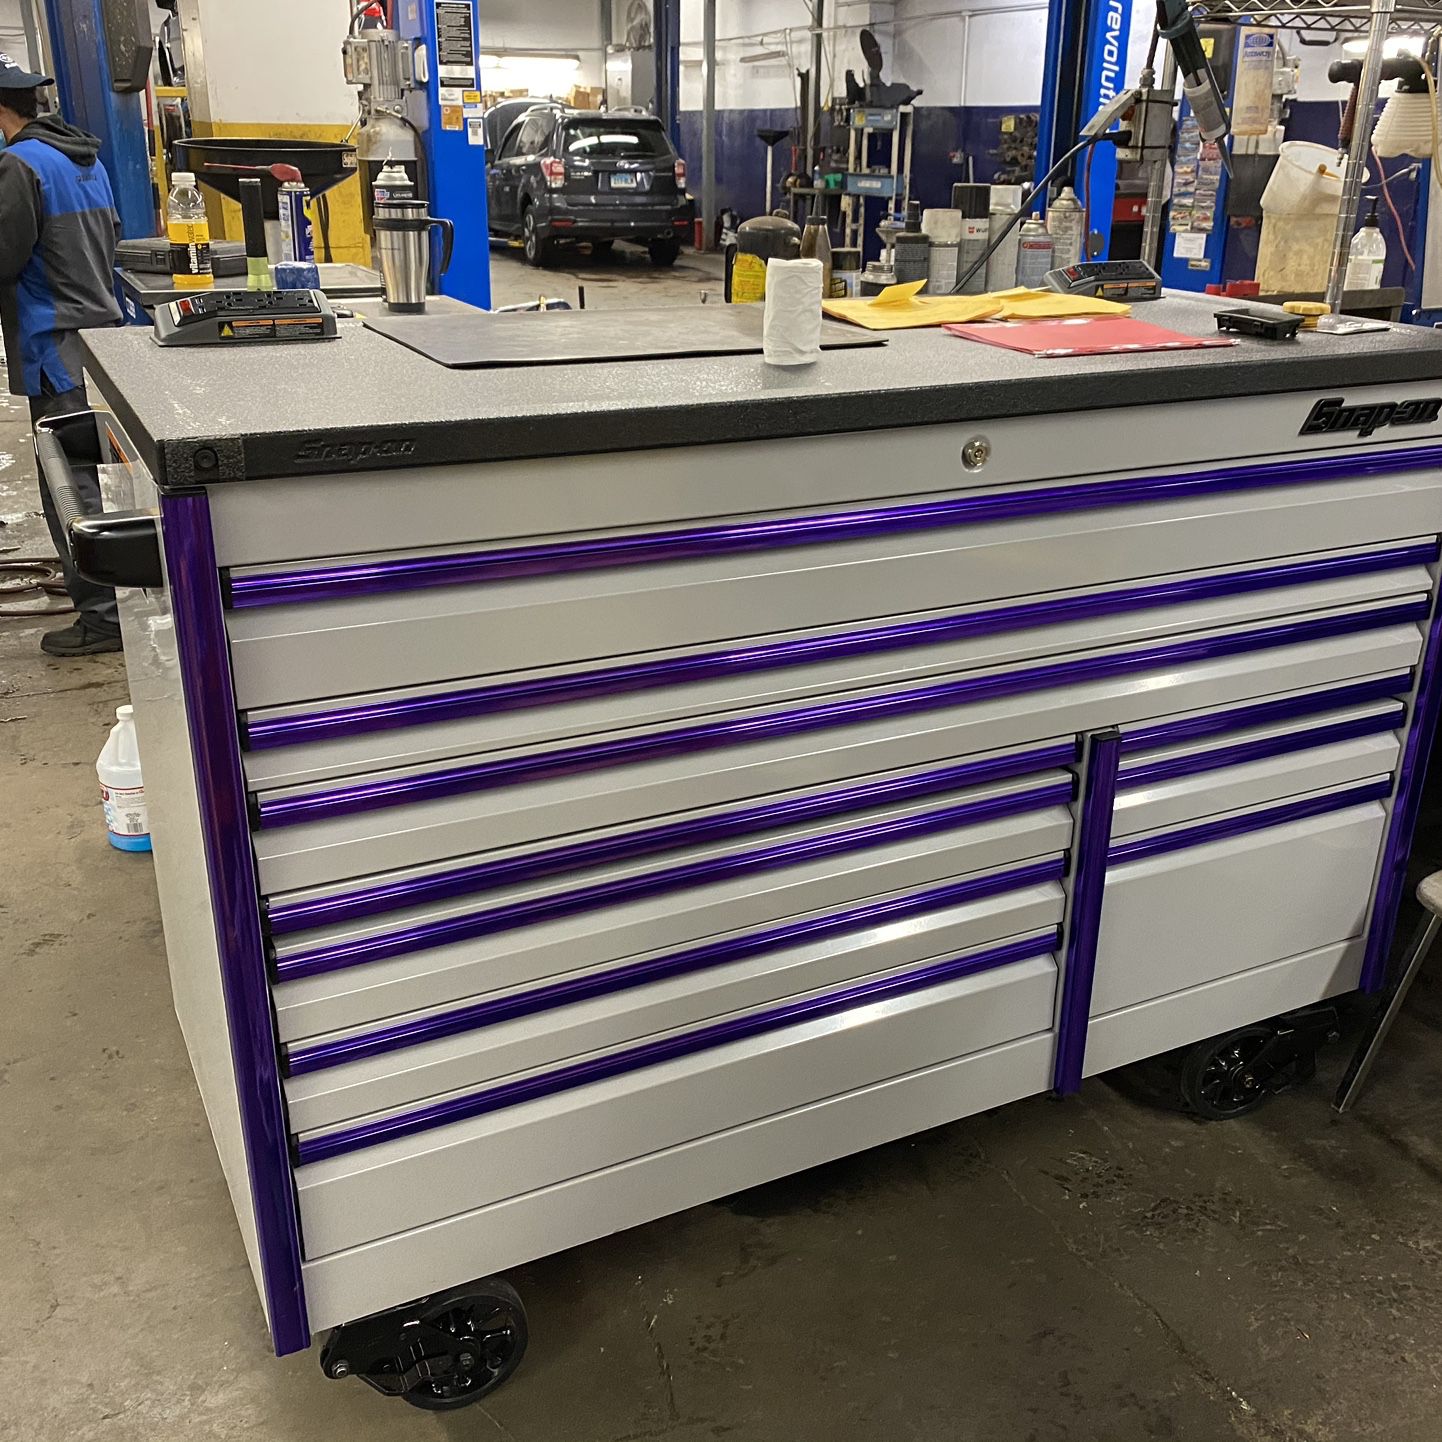 Snap On Tool Box 68” Artic Silver With Purple Trim for Sale in Trumbull, CT  - OfferUp